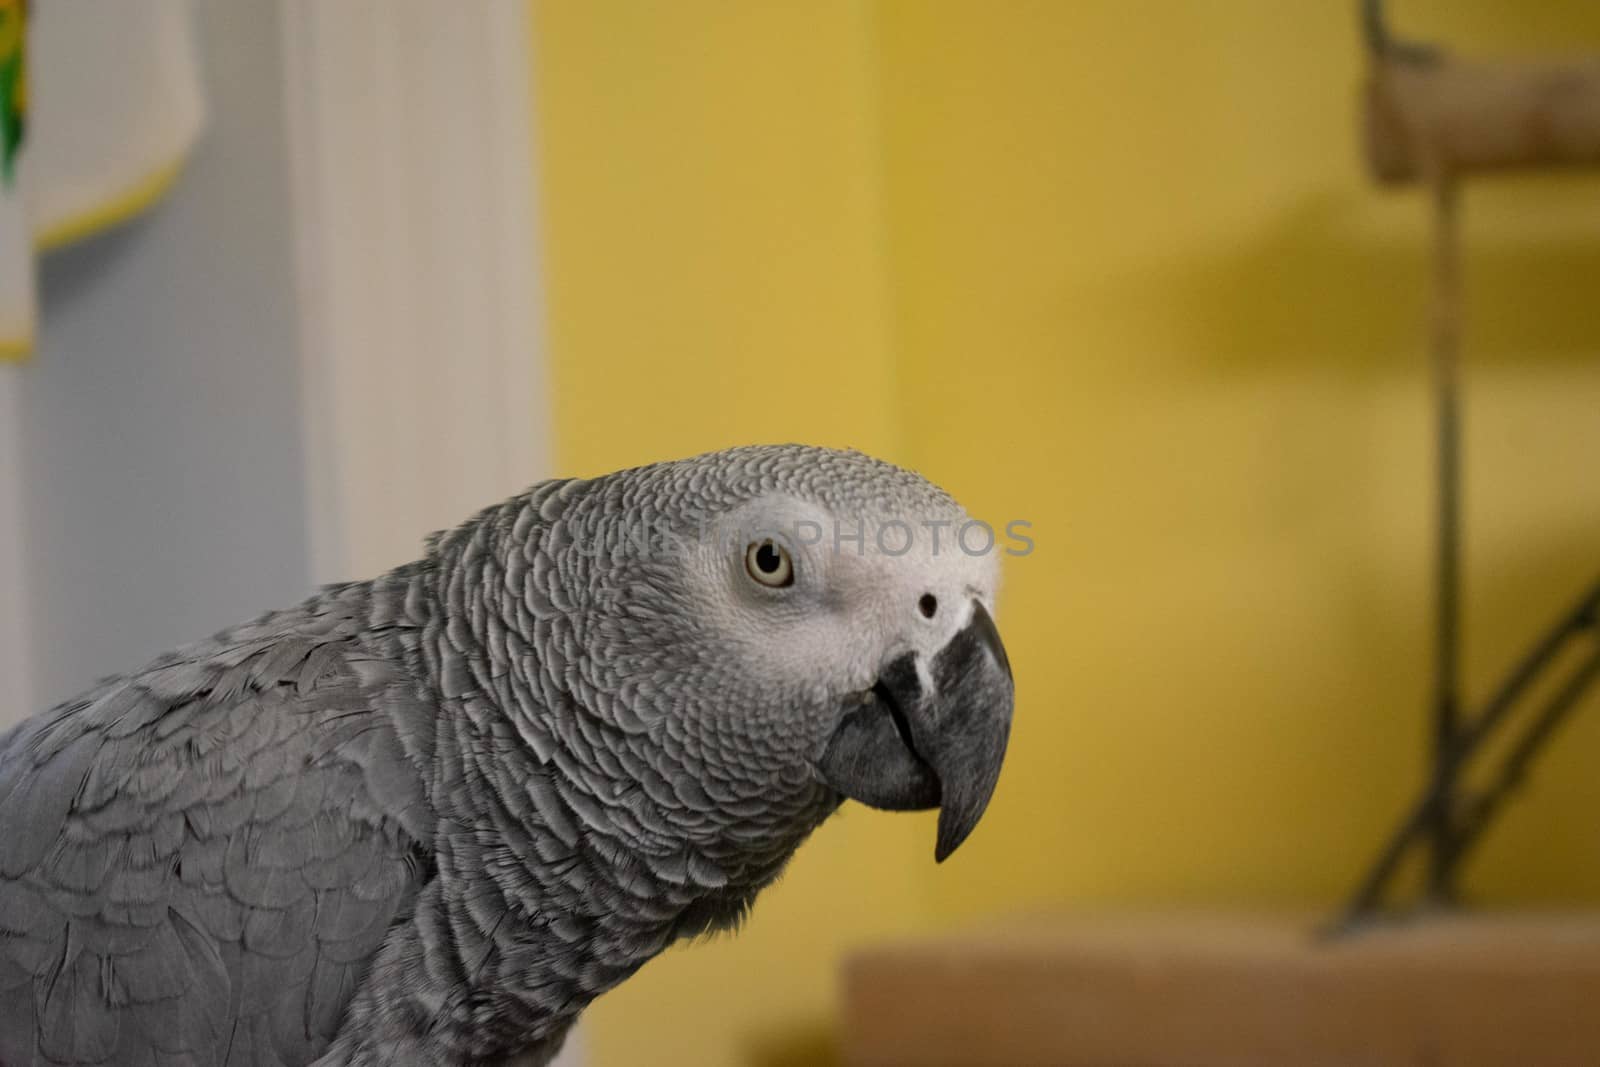 An African Gray Parrot With a Black Beak Looking at the Camera With a Yellow Wall Behind Her